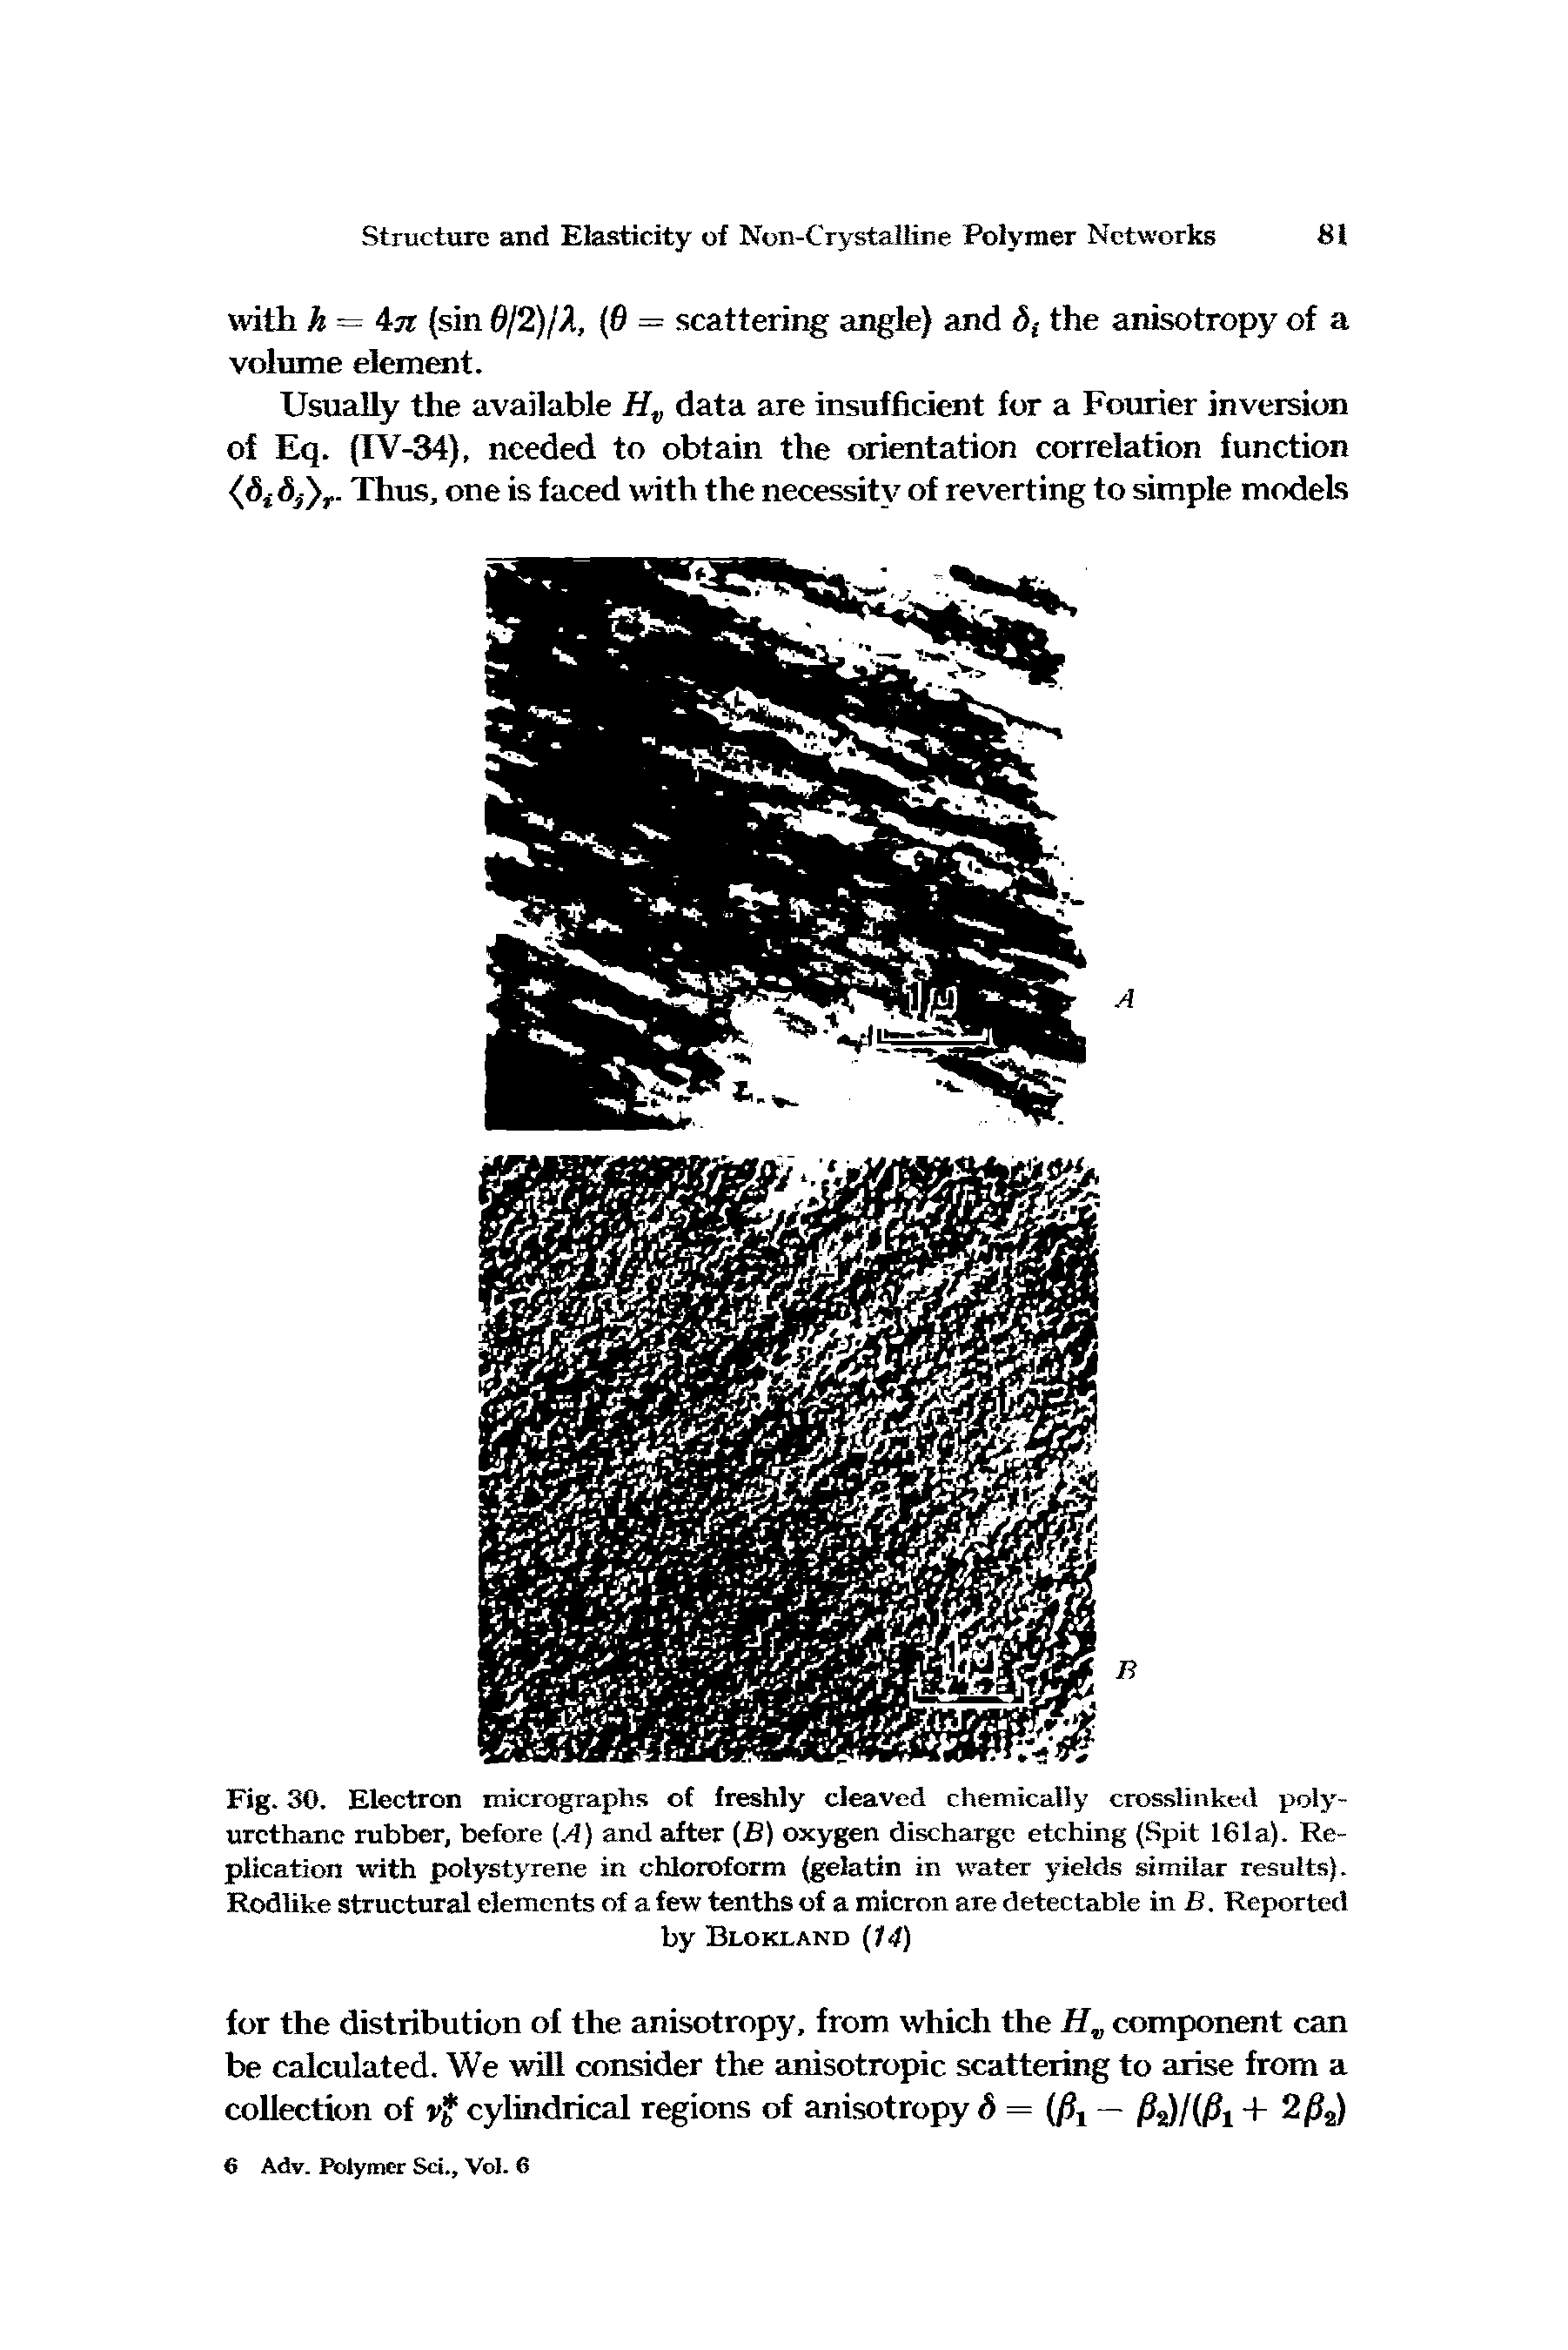 Fig. 30. Electron micrographs of freshly cleaved chemically crosslinked polyurethane rubber, before (.4) and after (B) oxygen discharge etching (Spit 161a). Replication with polystyrene in chloroform (gelatin in water yields similar results). Rodlike structural elements of a few tenths of a micron are detectable in B. Reported...